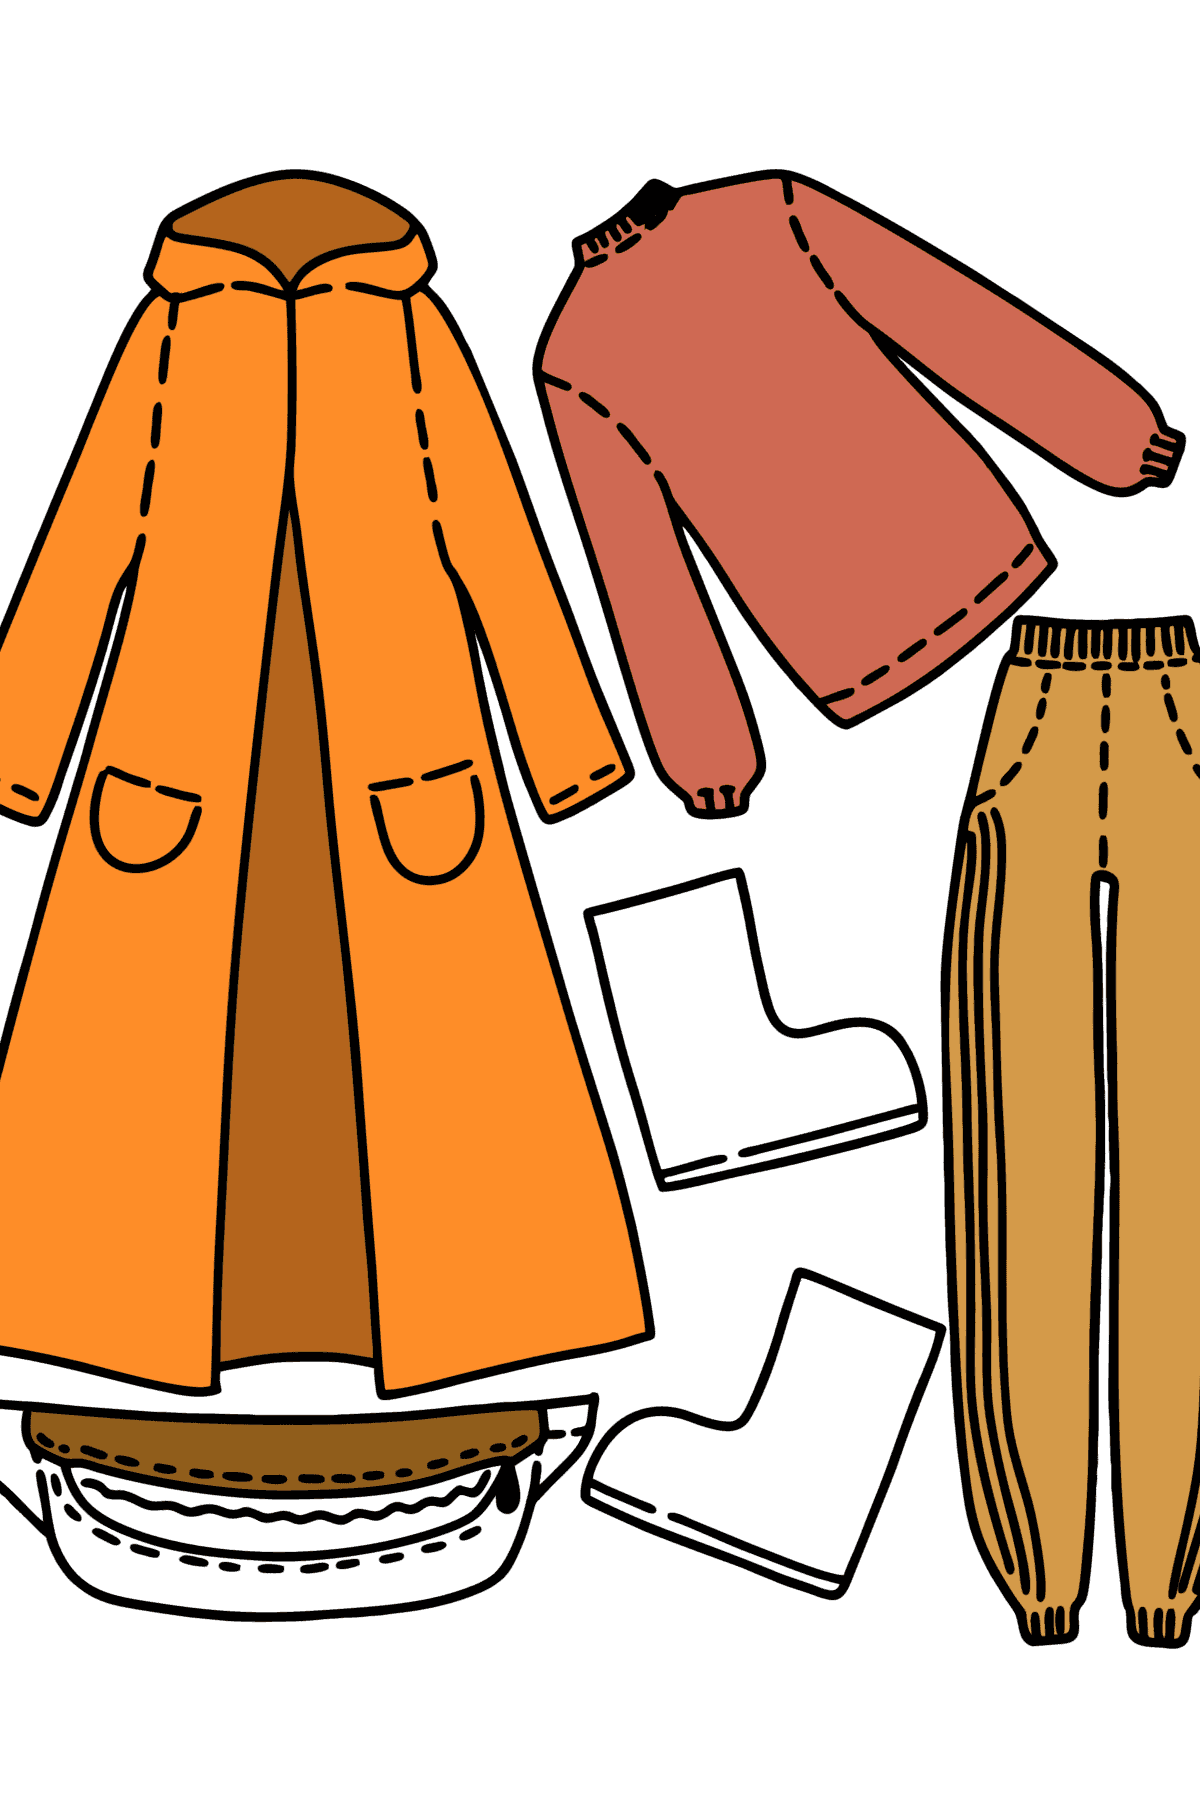 Autumn Clothes coloring page - Coloring Pages for Kids